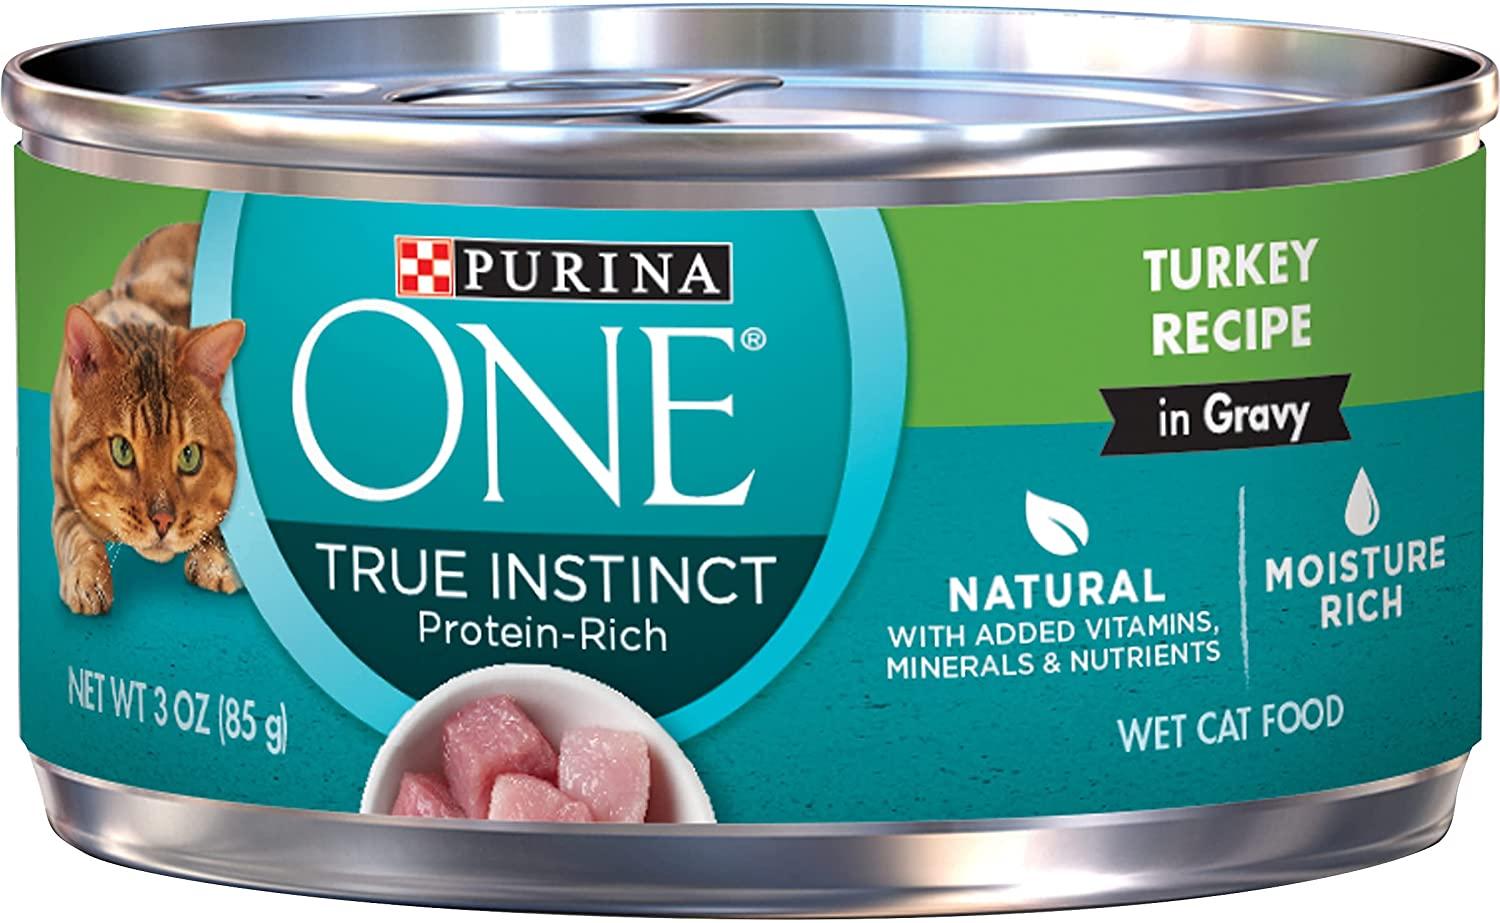 24 Purina One True Instinct High Protein Natural Wet Cat Food for $10.16 Shipped